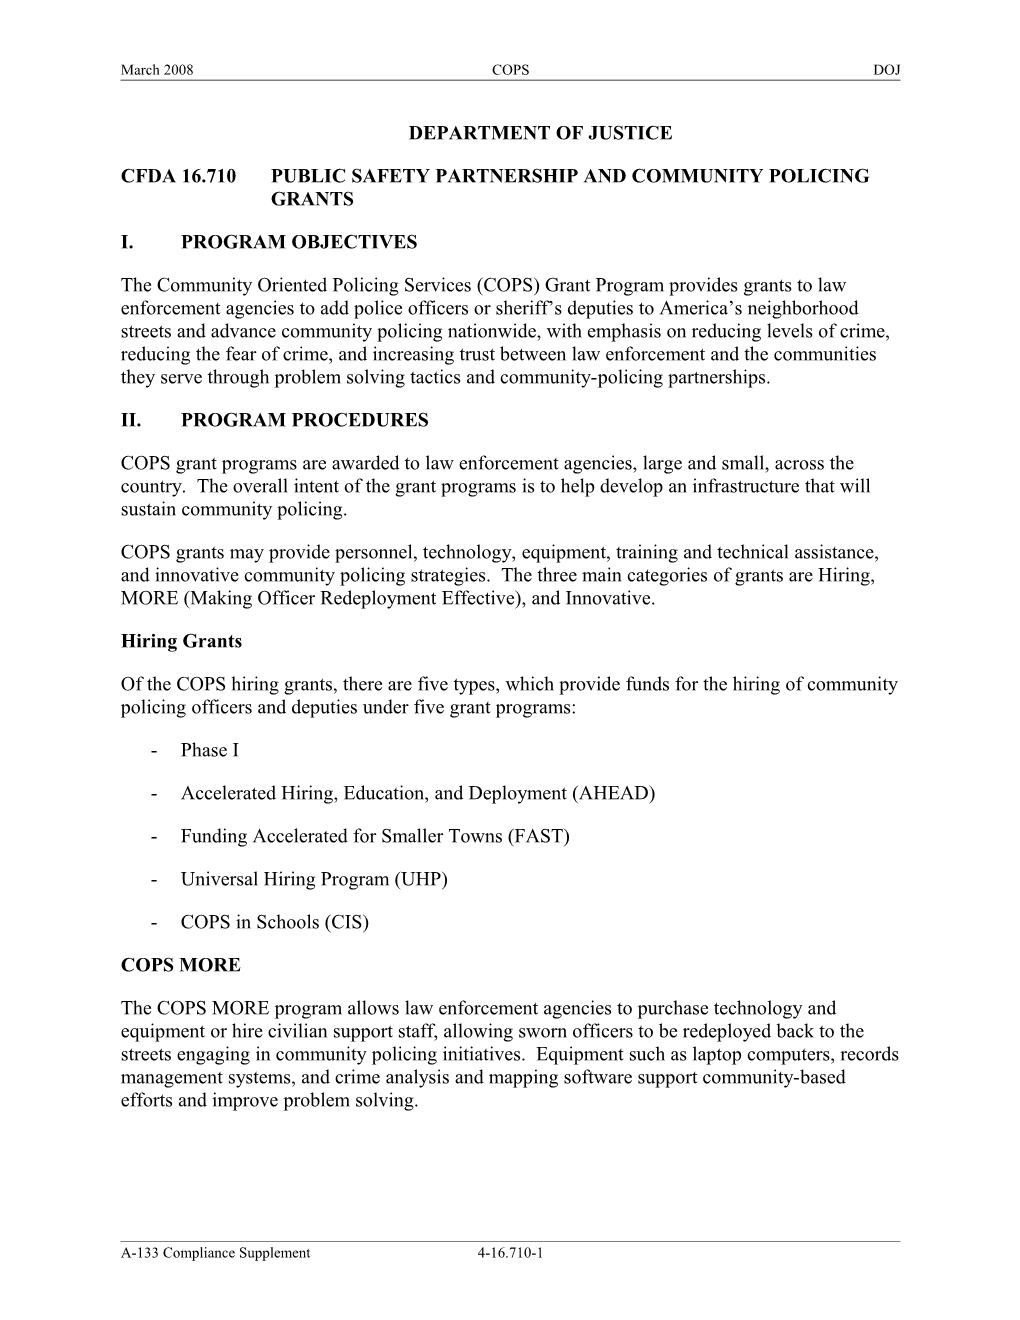 Cfda 16.710 Public Safety Partnership and Community Policing Grants